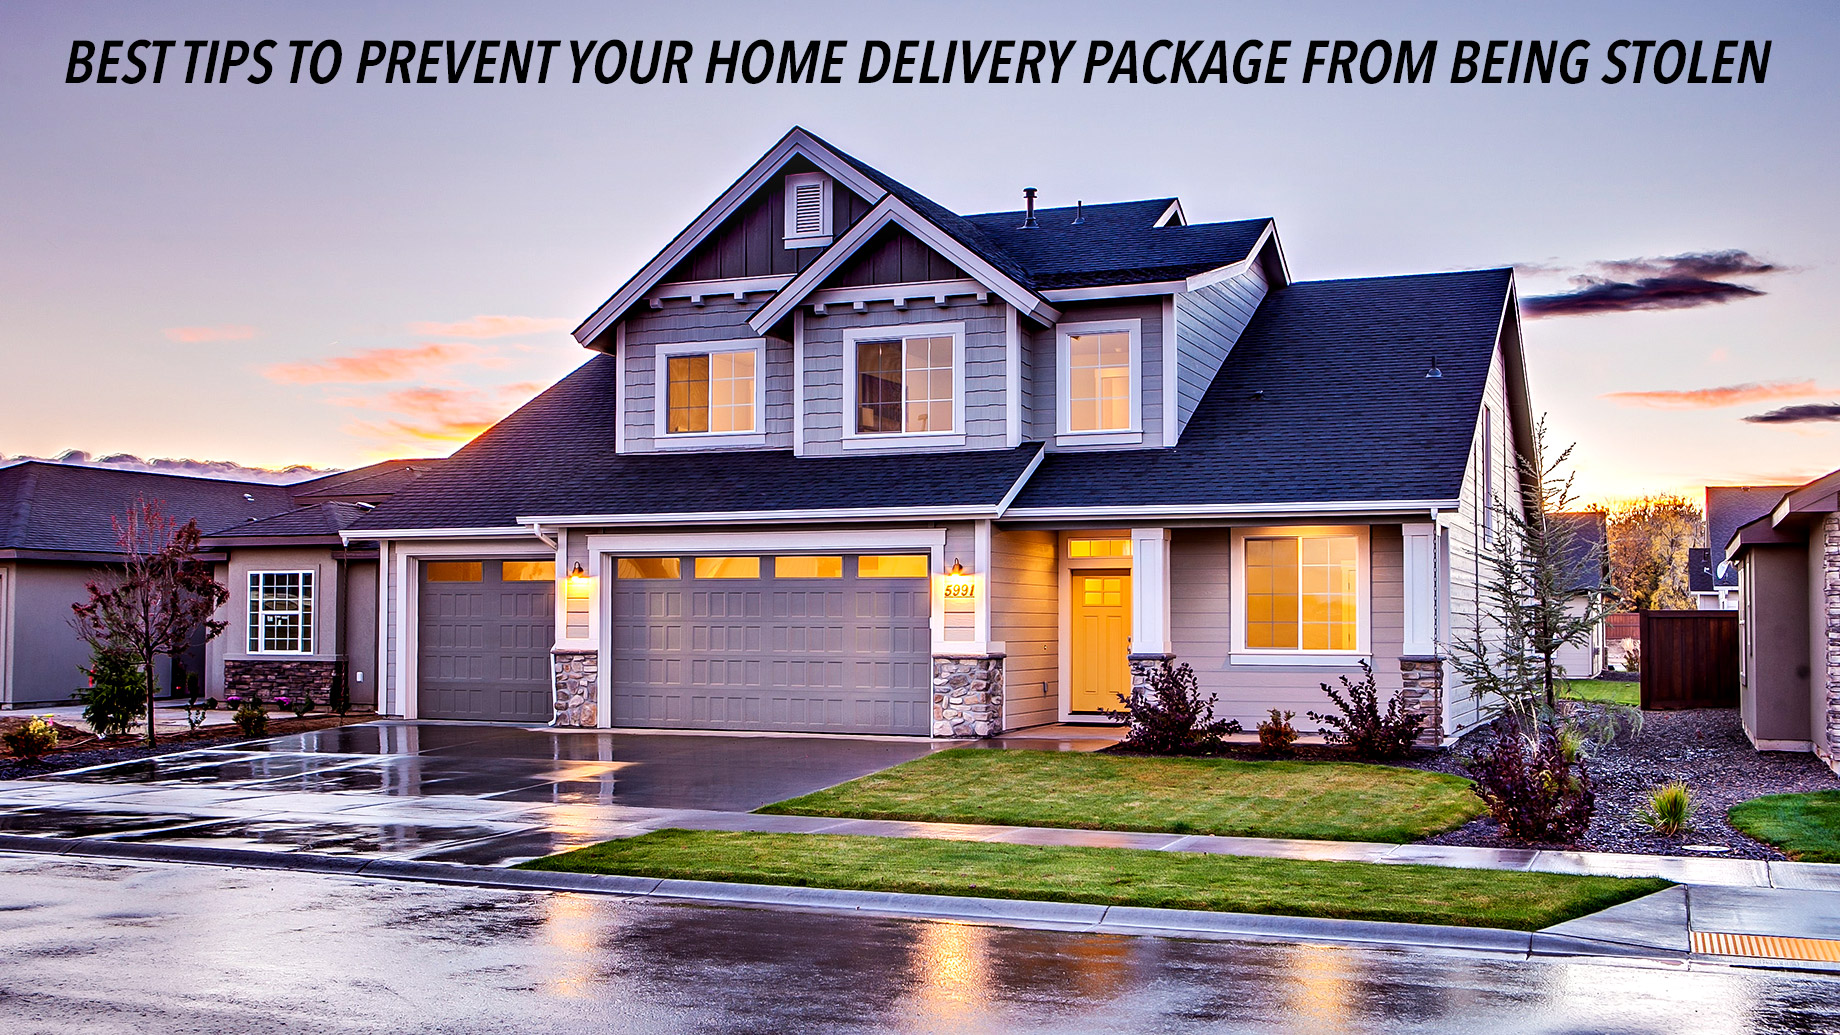 Best Tips to Prevent Your Home Delivery Package From Being Stolen